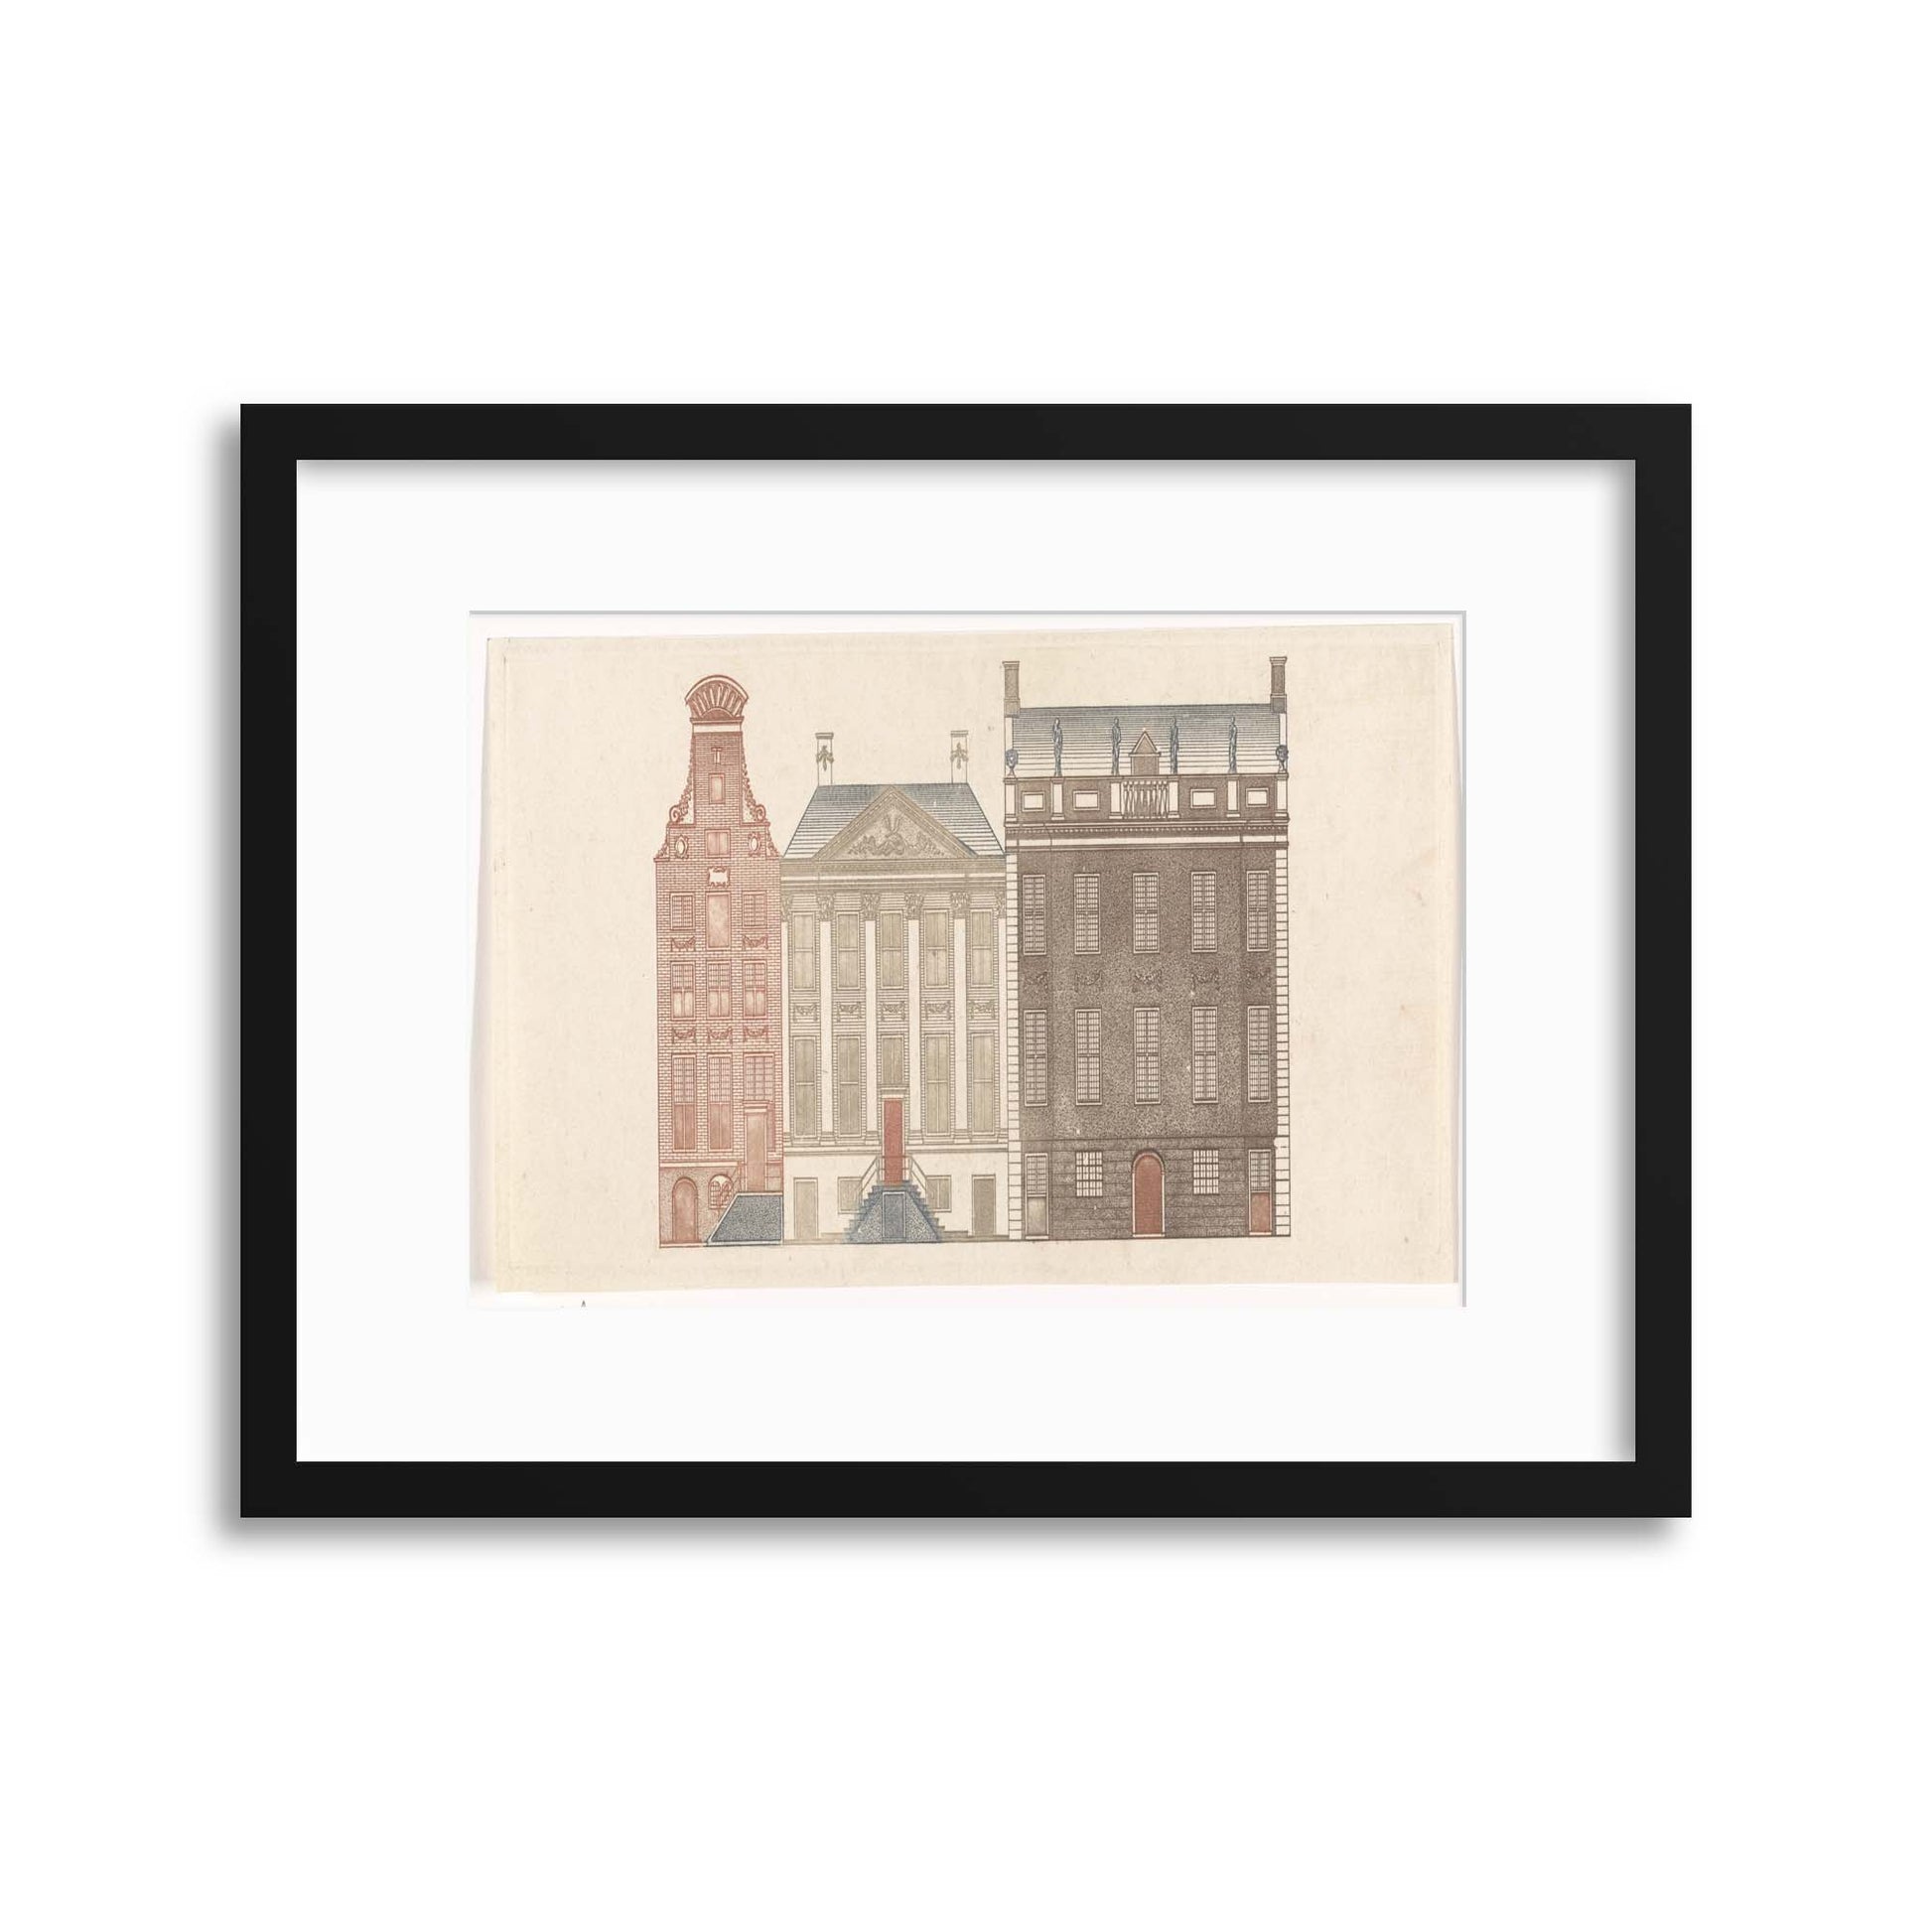 Classical Architecture, Illustrated - III Framed Print - USTAD HOME